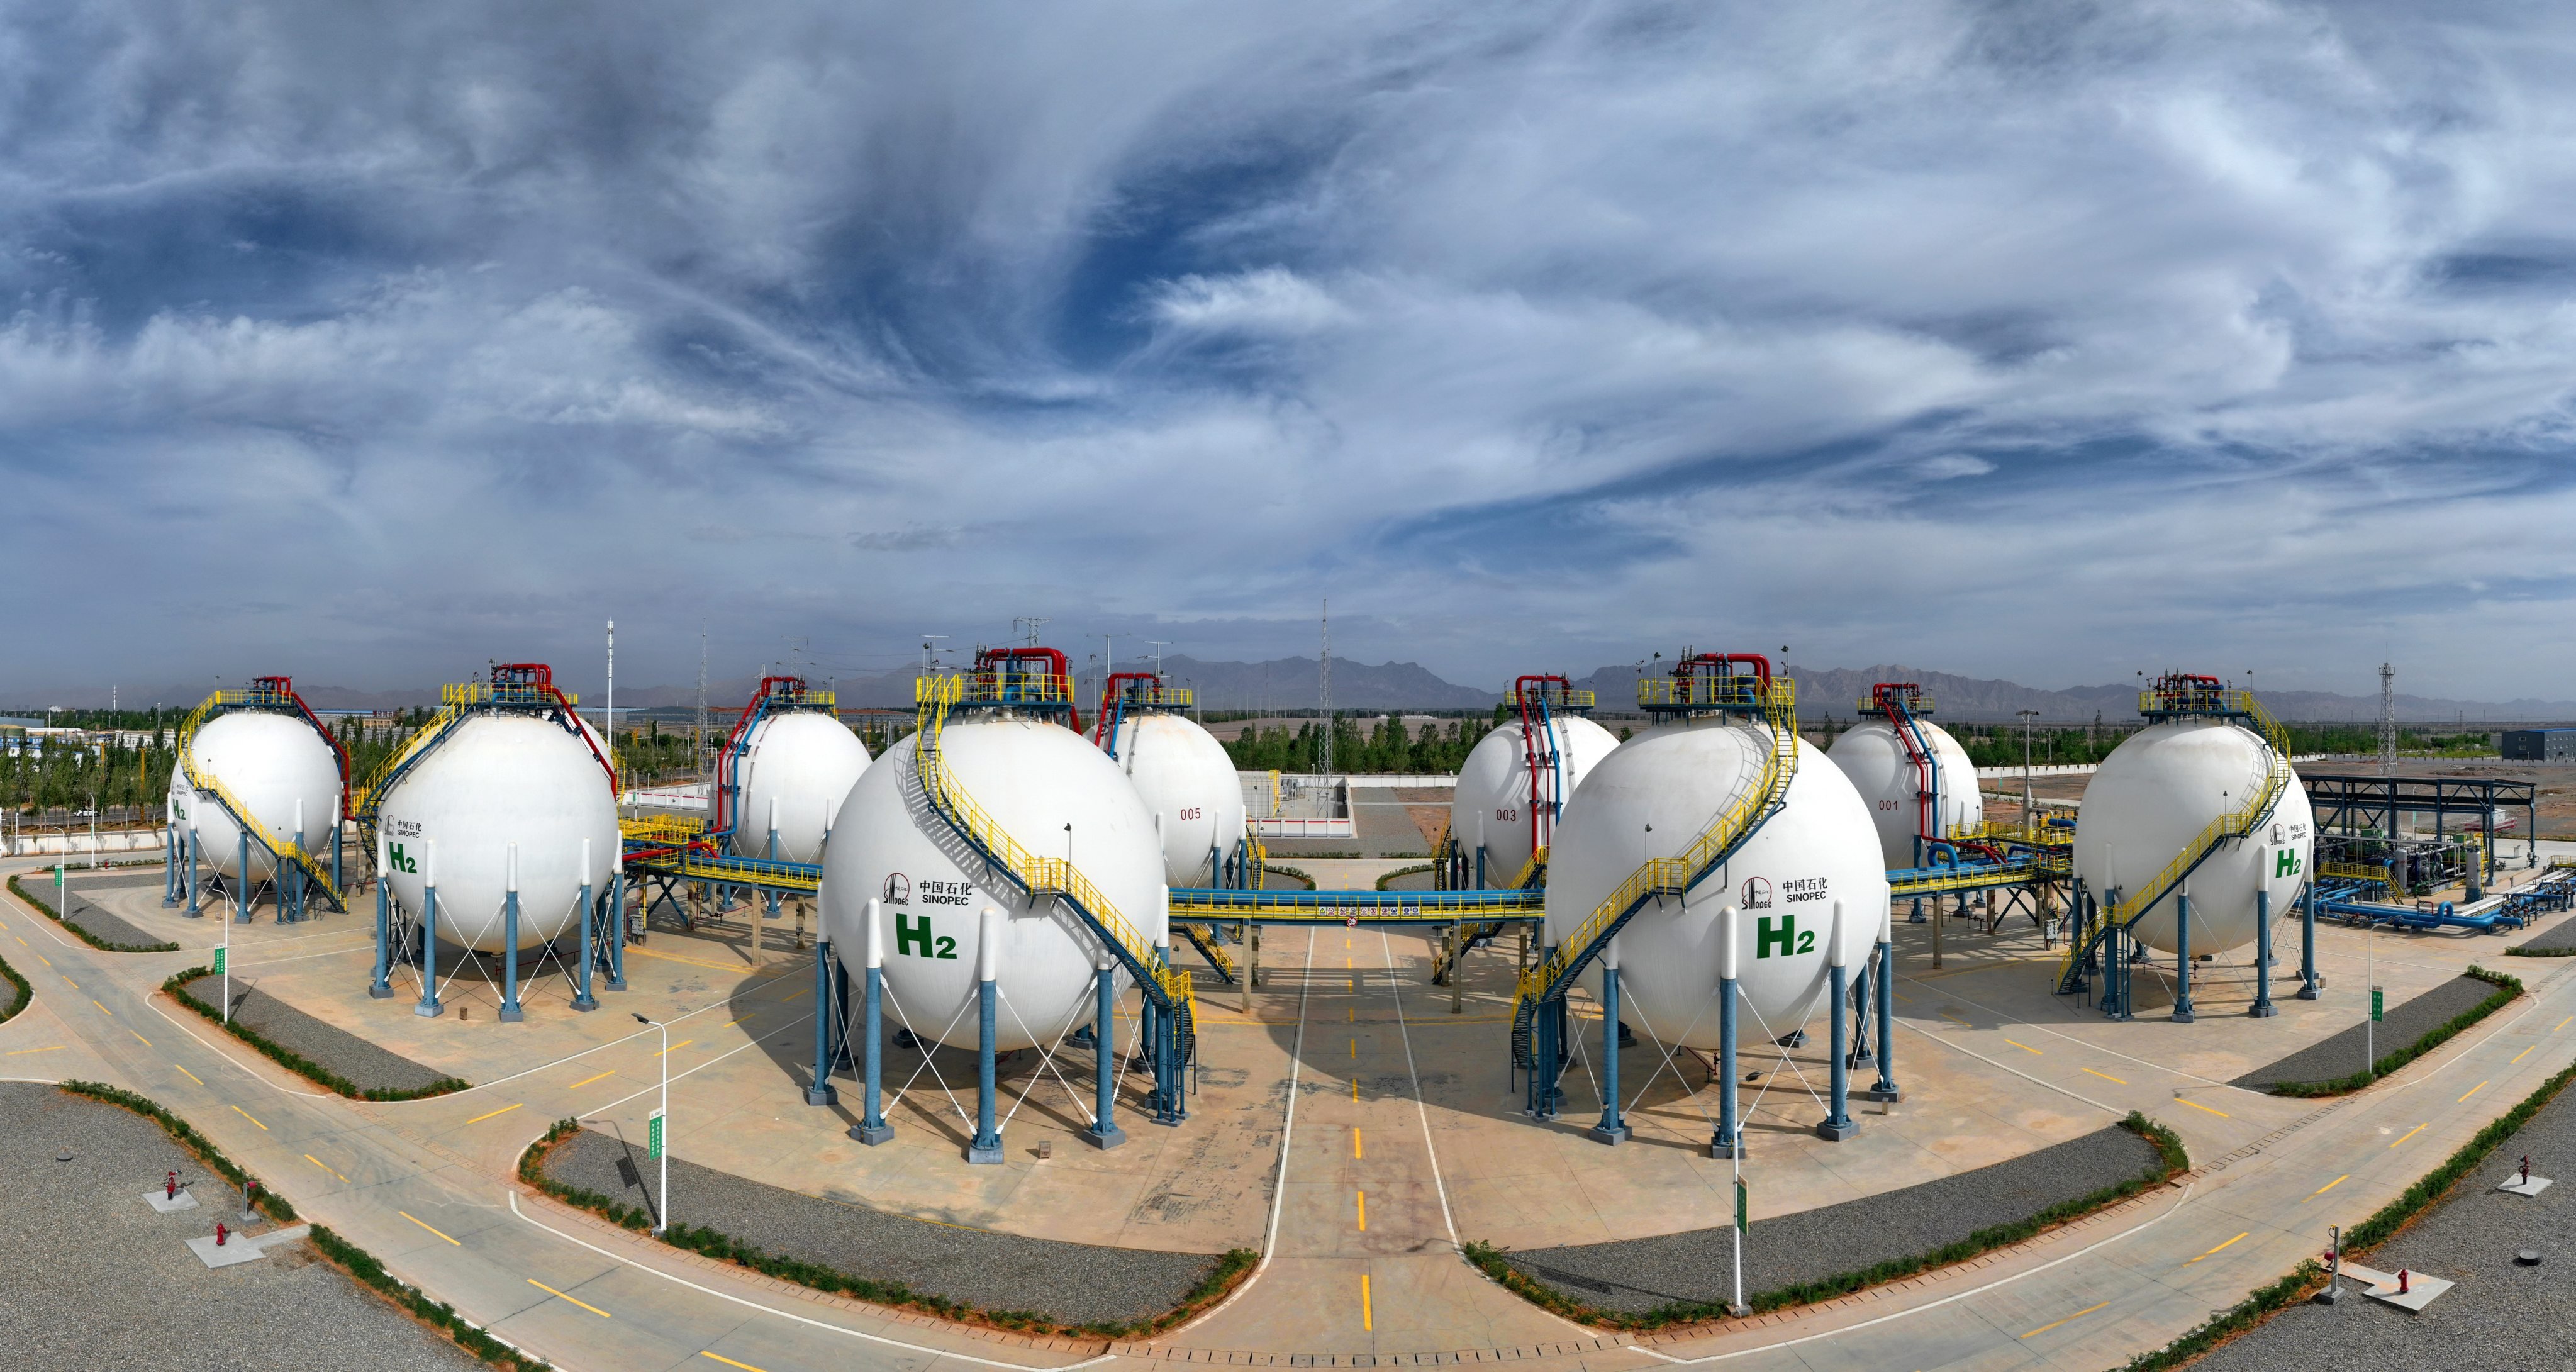 A view of hydrogen storage tanks at the mega green hydrogen plant on August 30, 2023 in Kuqa, Xinjiang Uygur Autonomous Region of China. Photo: Getty Images